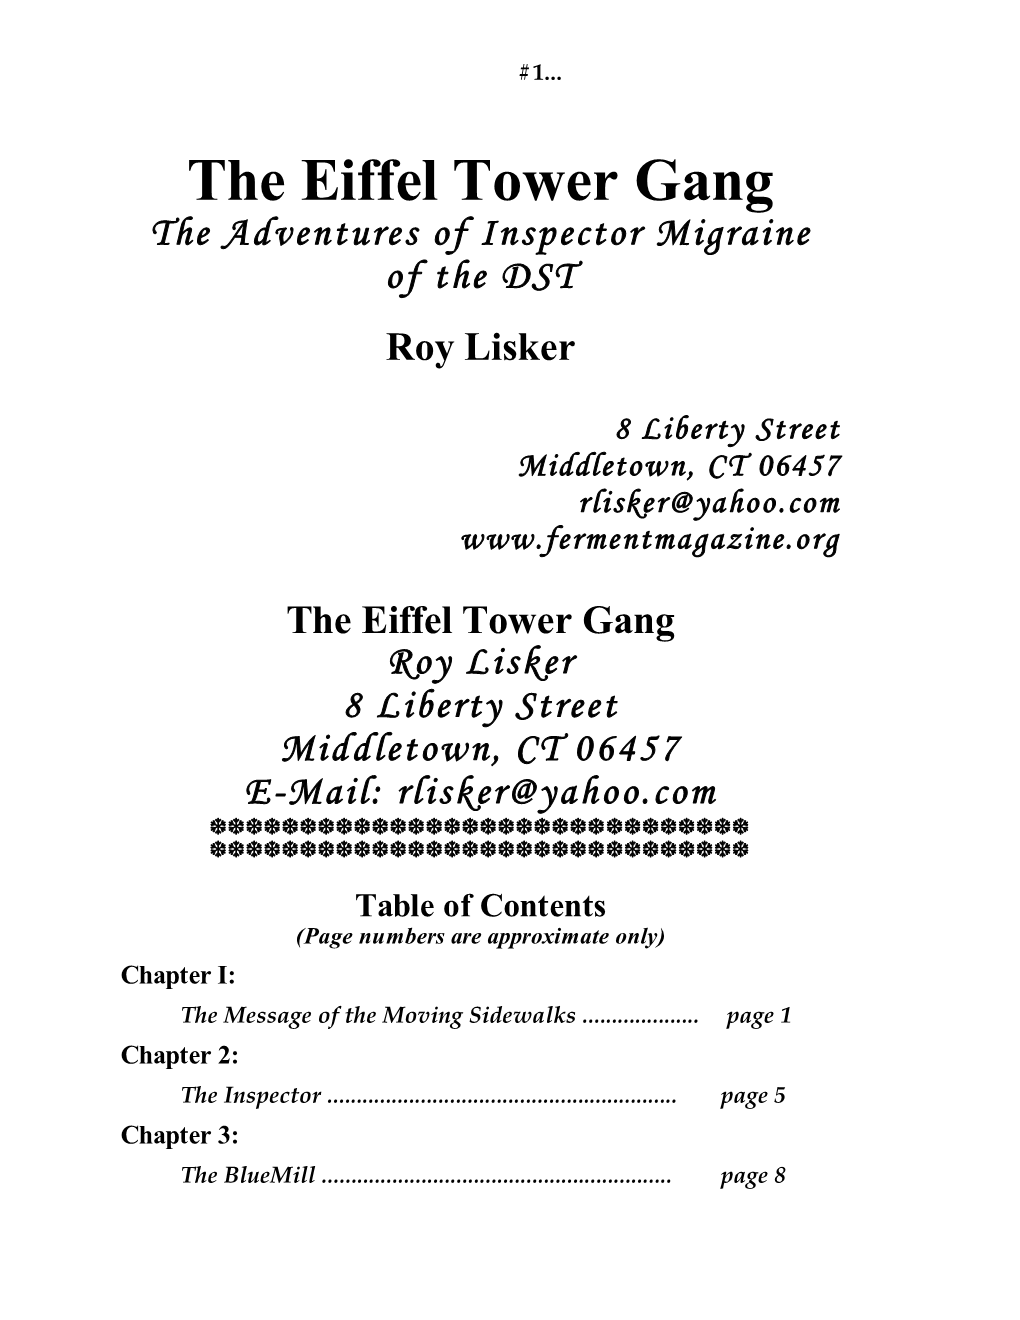 The Eiffel Tower Gang the Adventures of Inspector Migraine of the DST